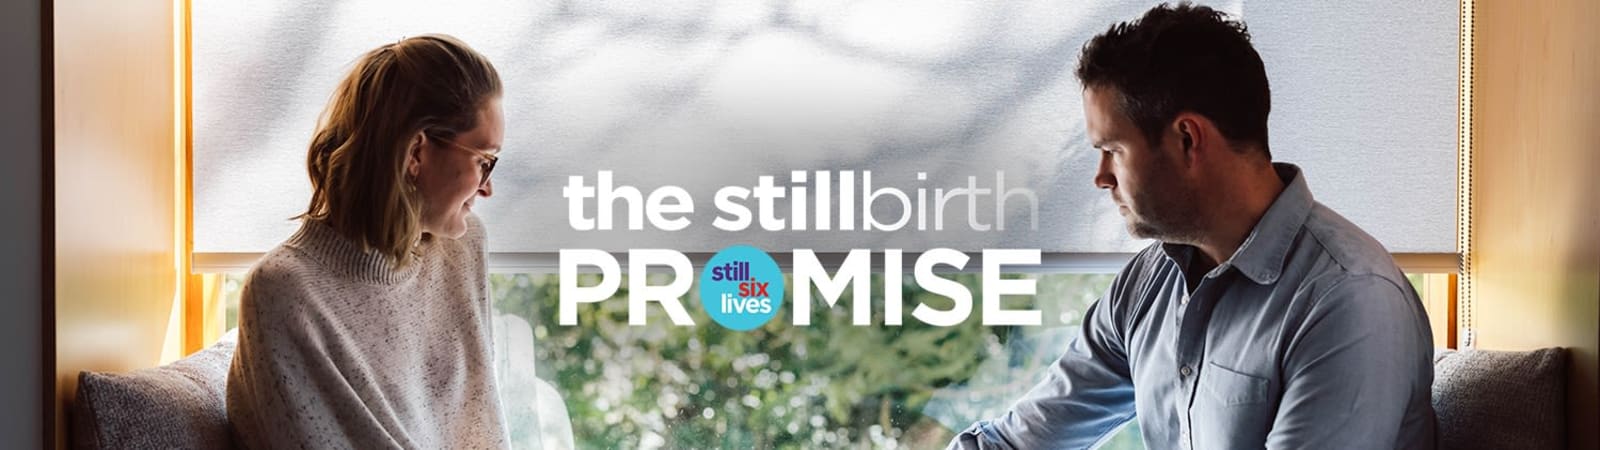 Make ‘The Stillbirth Promise’ to help reduce the rate